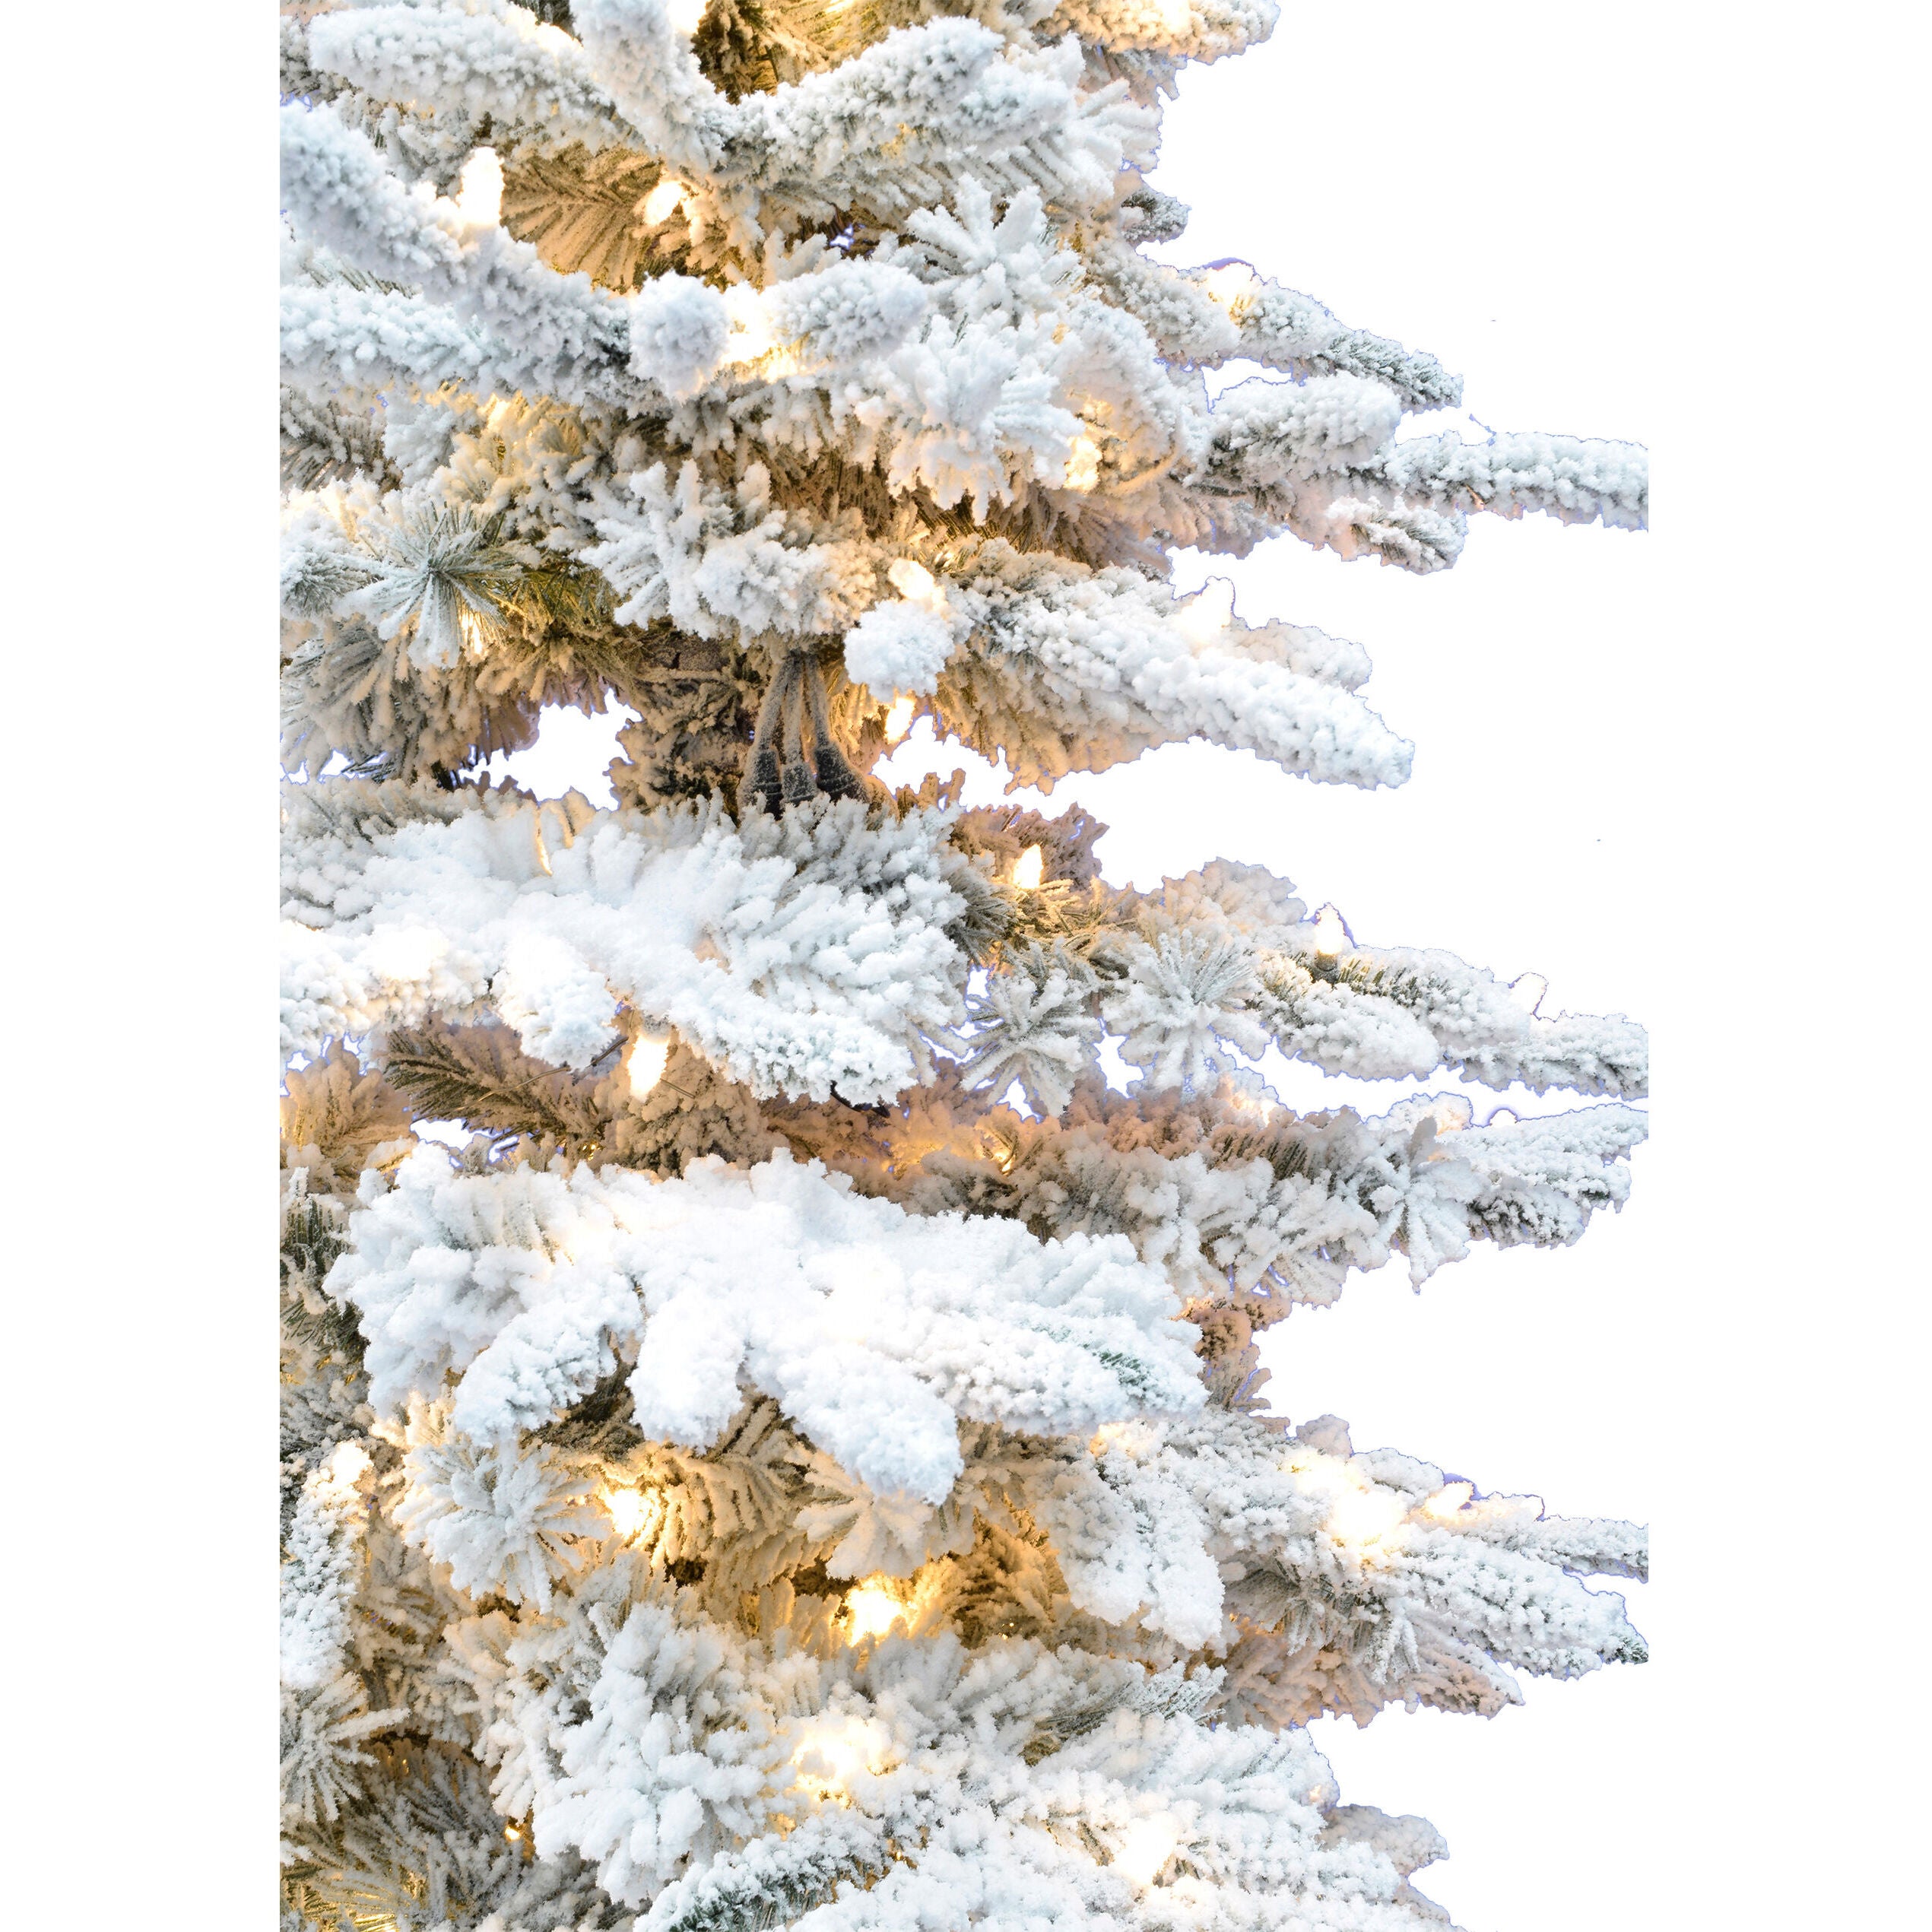 Fraser Hill Farm -  12-Ft. Flocked Pine Valley Christmas Tree with Warm White LED Lighting